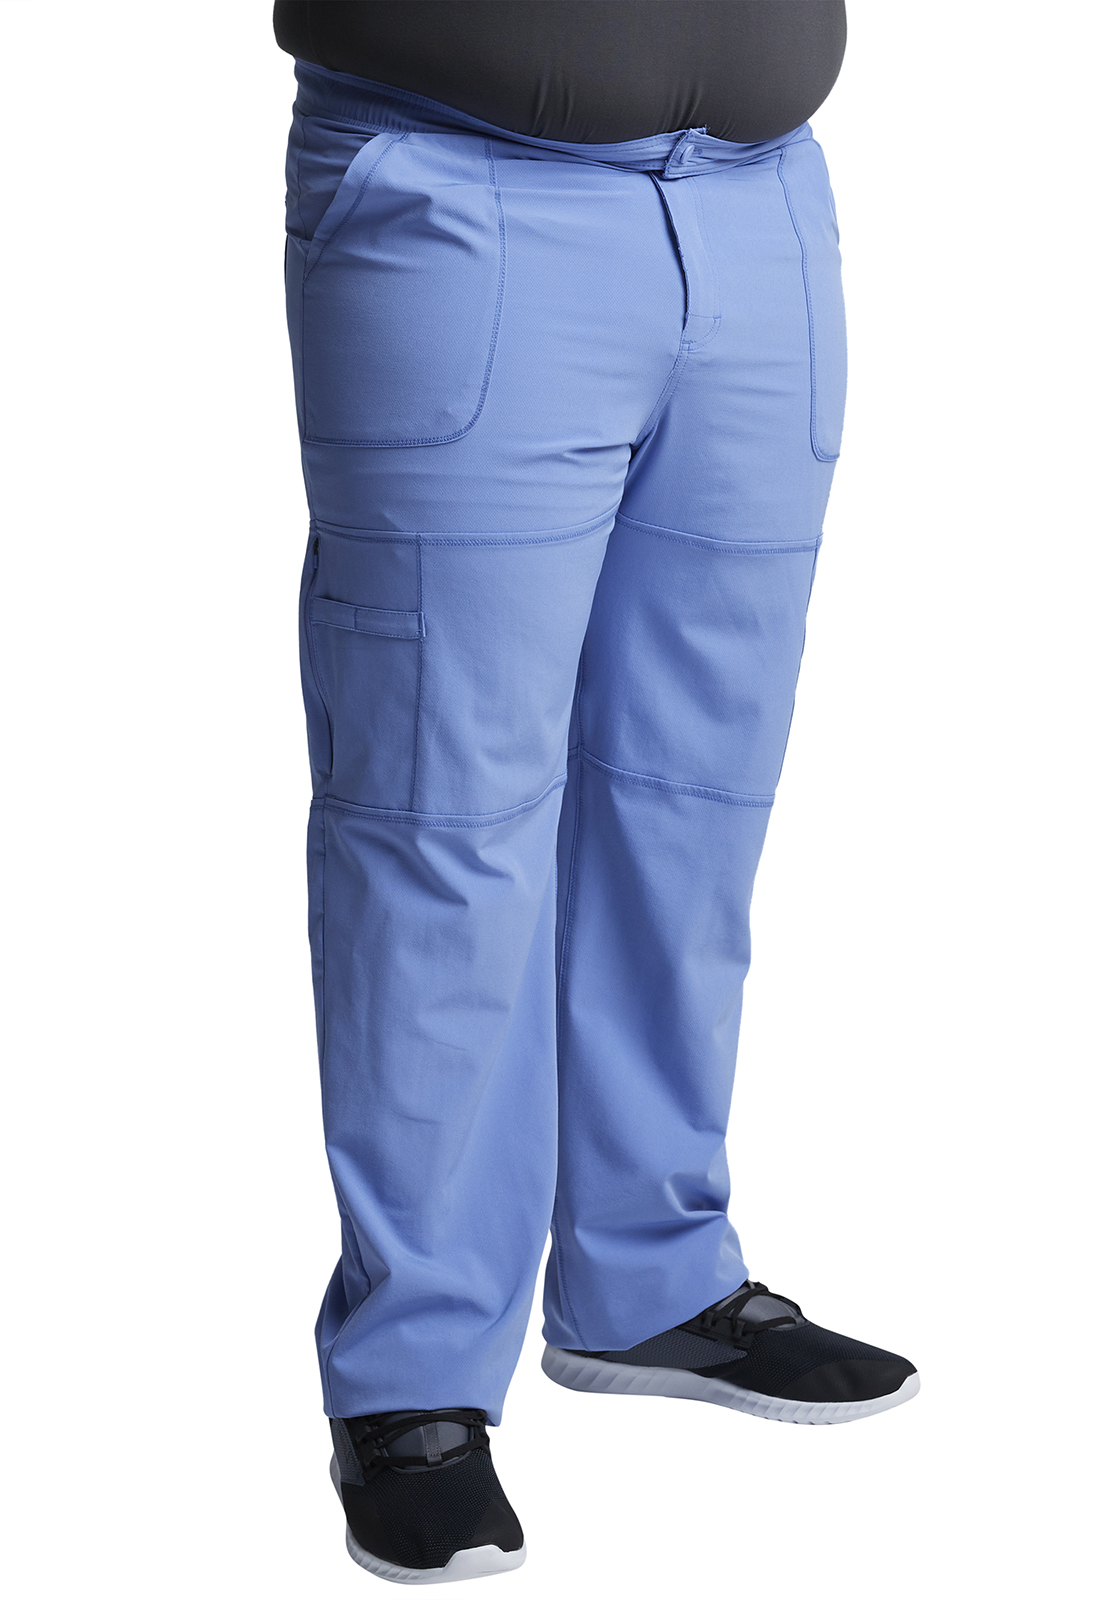 Scrubs Dickies Men's Tall Zip Fly Pull-On Pant 81111AT PTWZ Pewter Free Shipping 